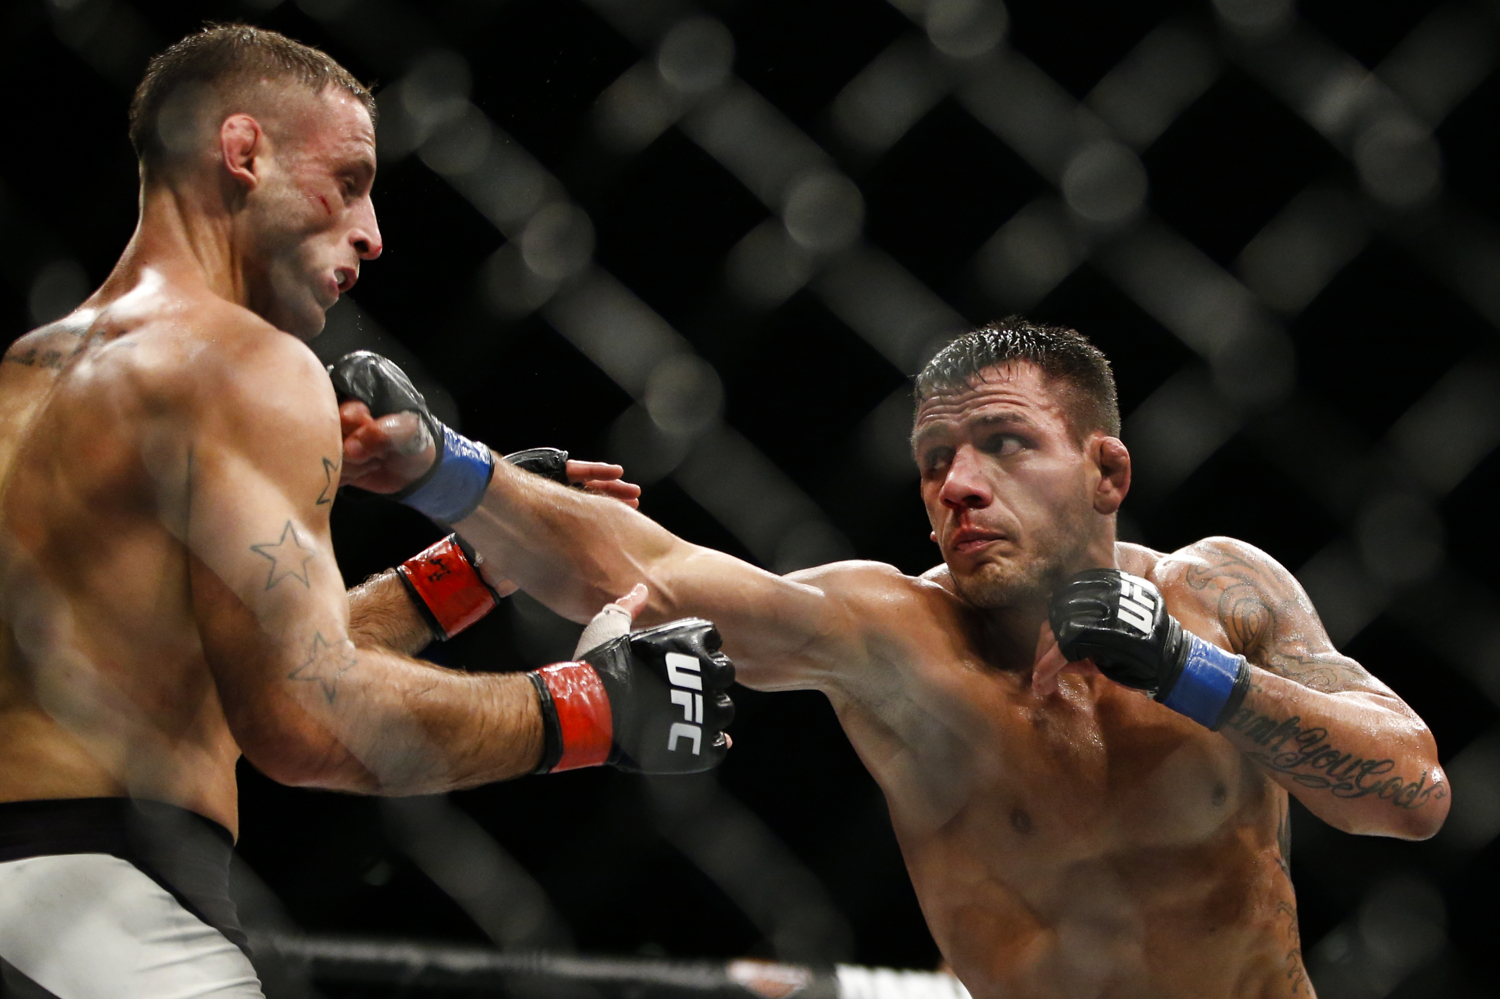  Rafael dos Anjos (R) of Brazil punches Tarec Saffiedine of Belgium during their welterweight bout at the UFC Fight Night at the Singapore Indoor Stadium on June 17, 2017. 